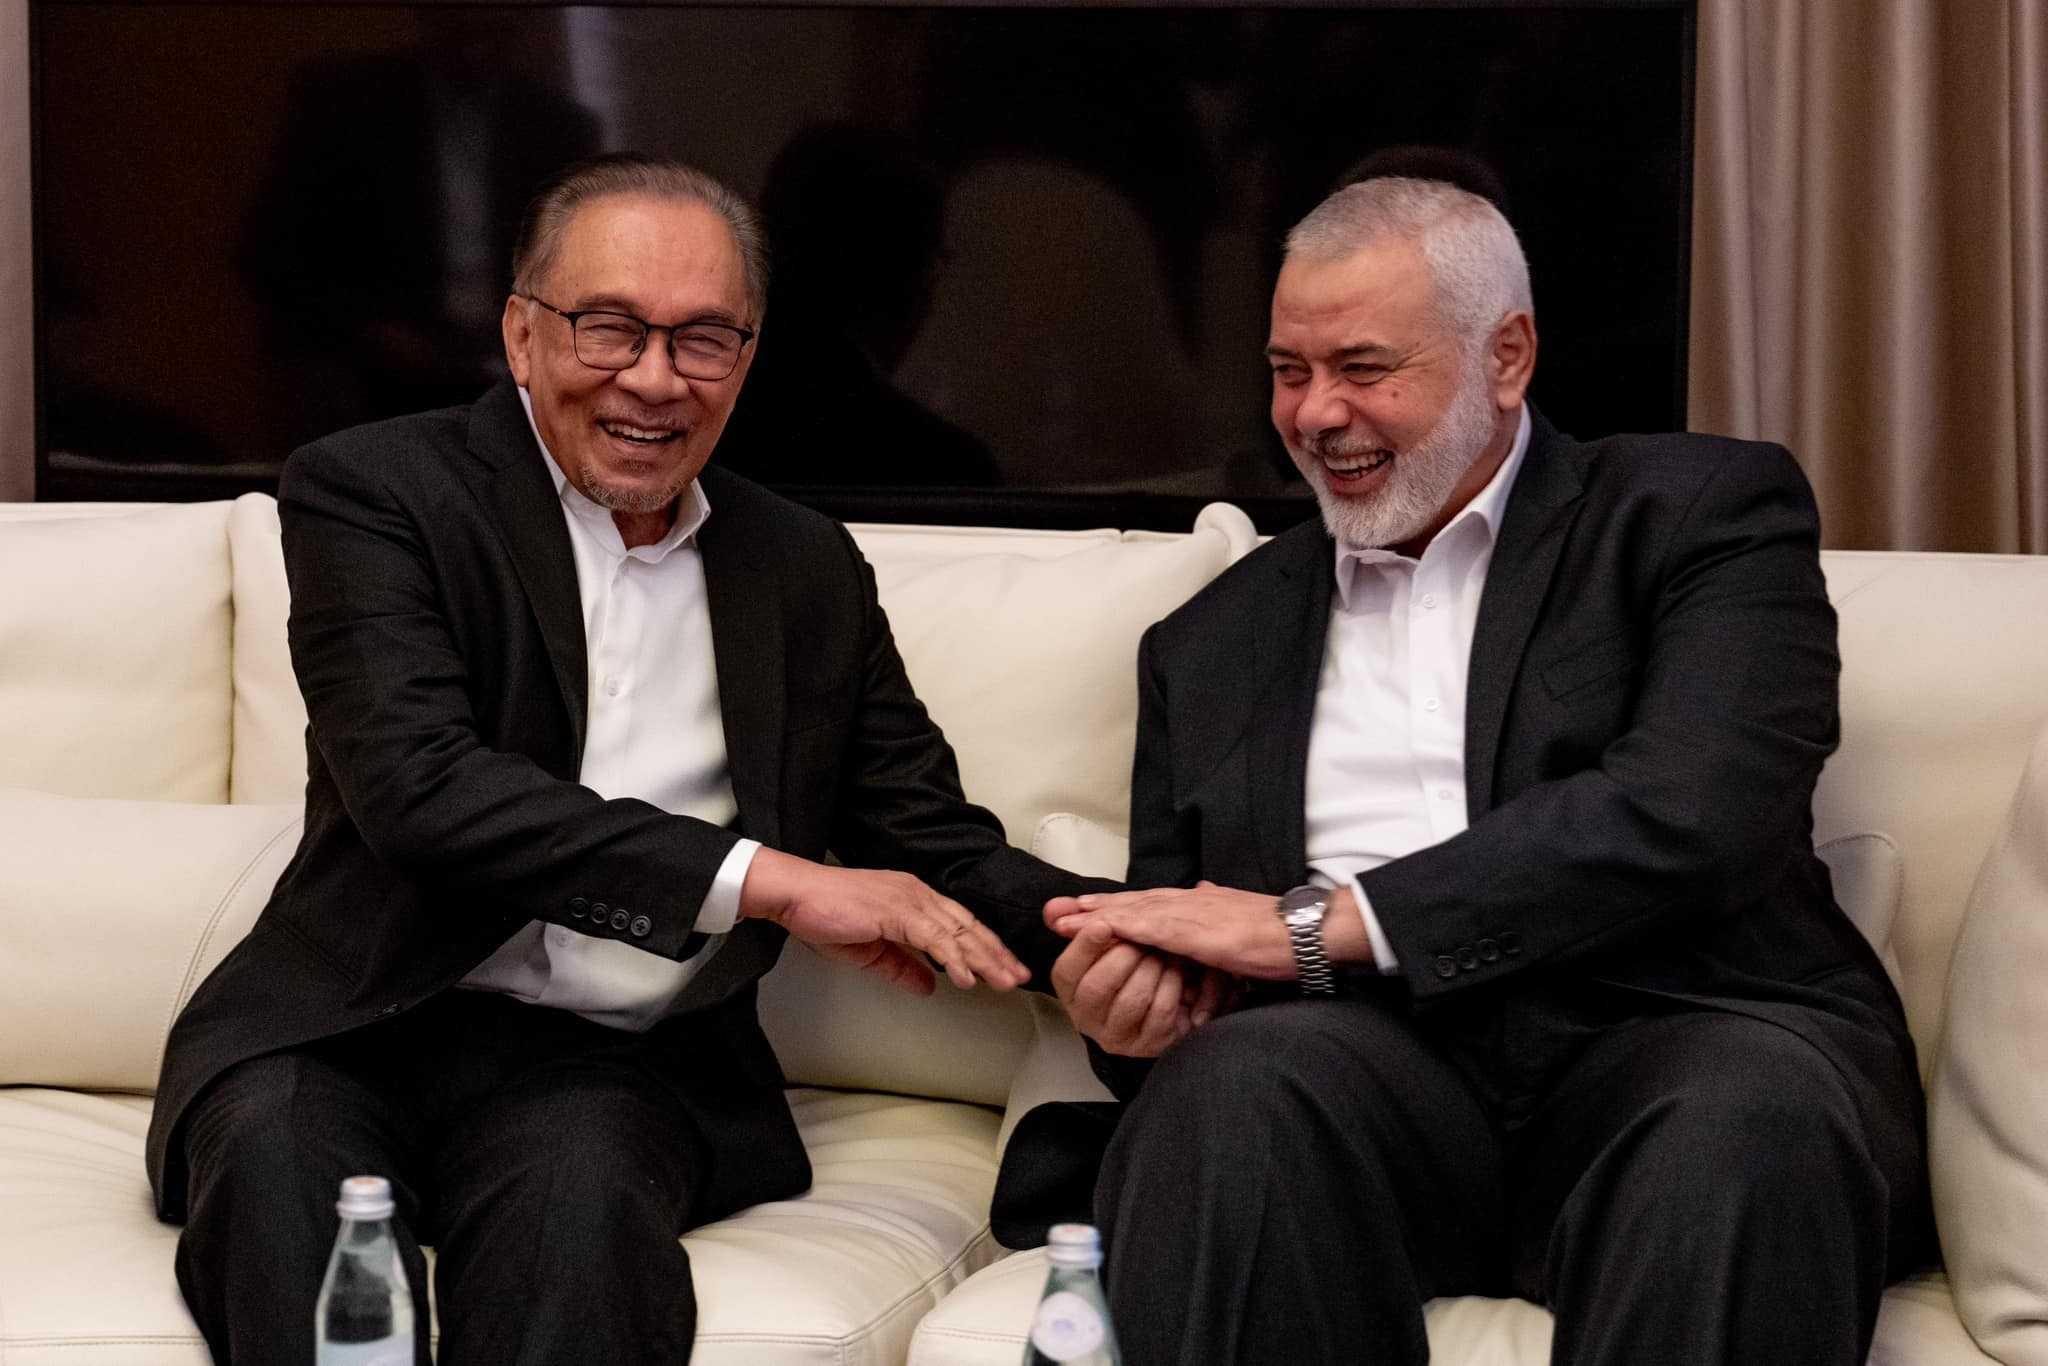 Prime Minister Anwar Ibrahim, seen here with Hamas political bureau chief Ismail Haniyeh during a meeting in Qatar last month, says he has discussed with the group about Malaysia doing business with companies linked to Israel.